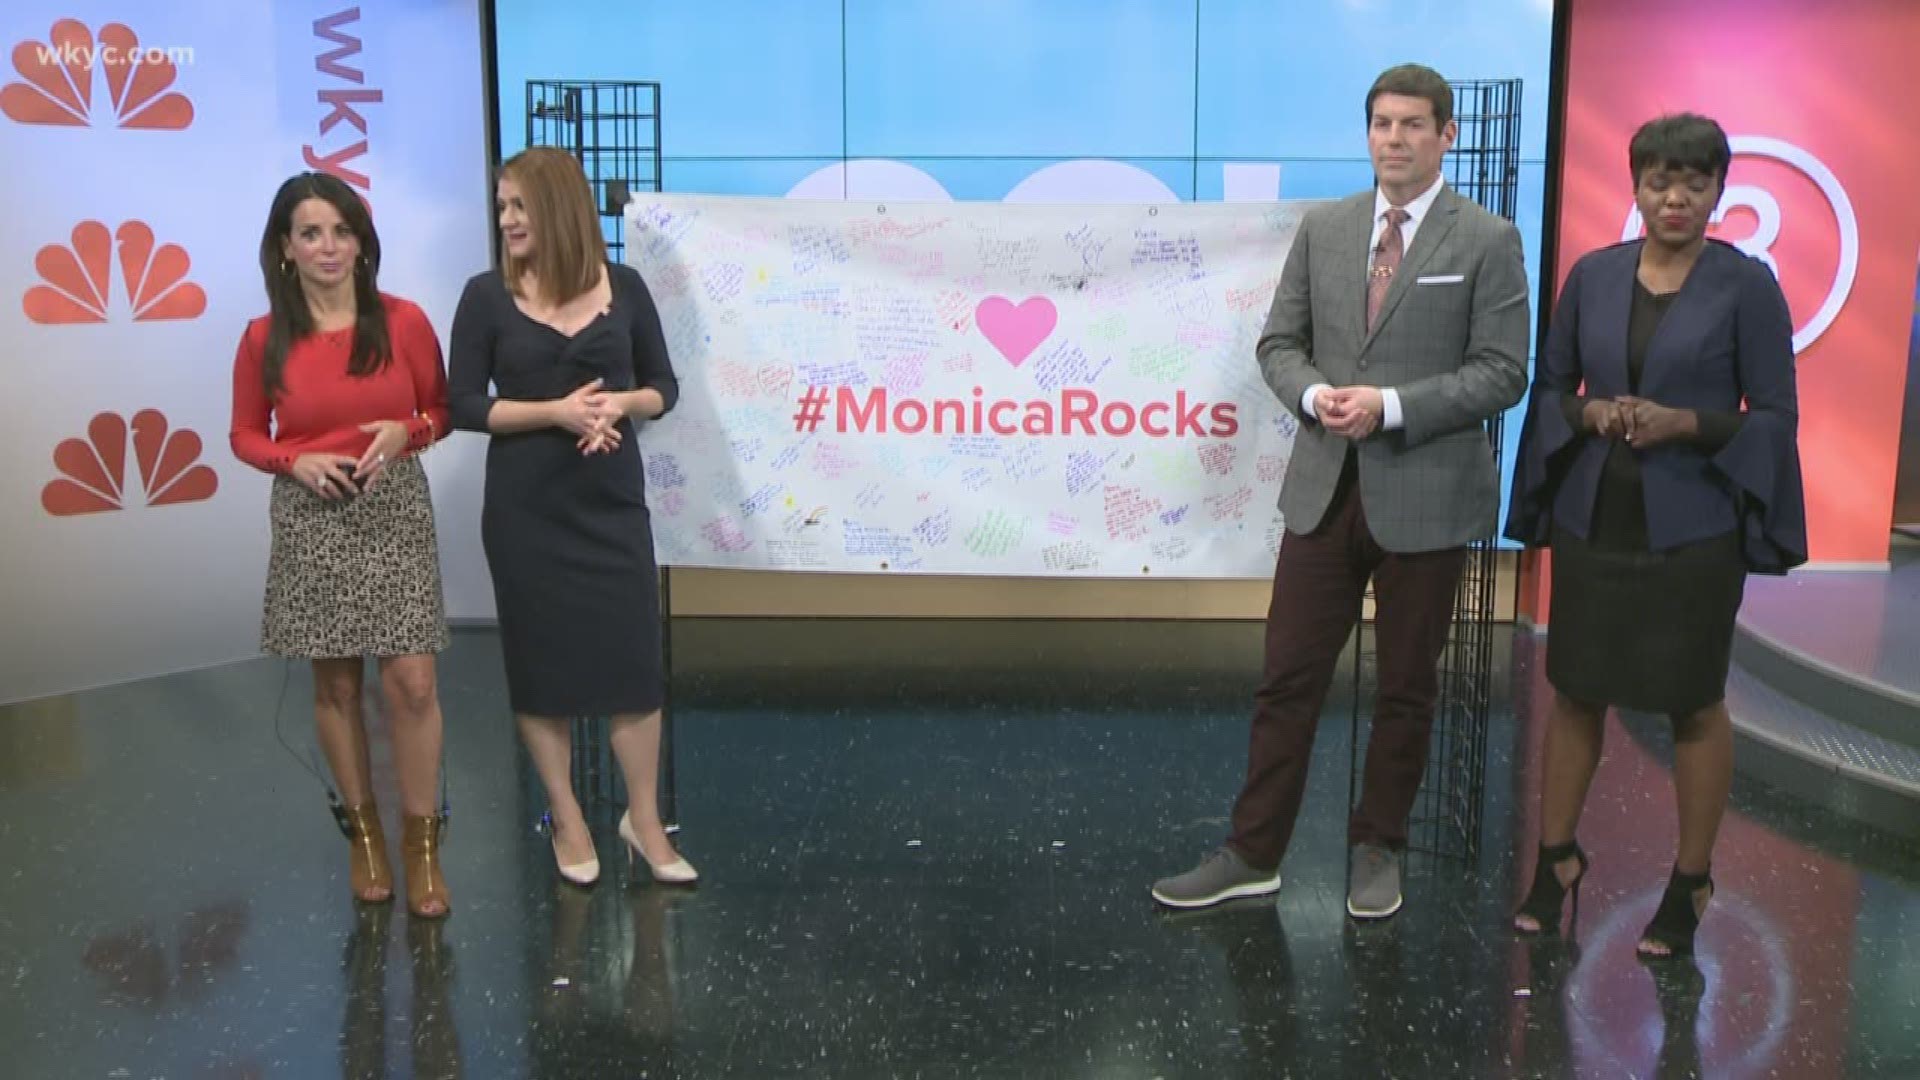 Maureen Kyle, Hollie Strano, Dave Chudowsky and Danielle Wiggins offer their best wishes to their colleague Monica Robins after her brain tumor diagnosis.